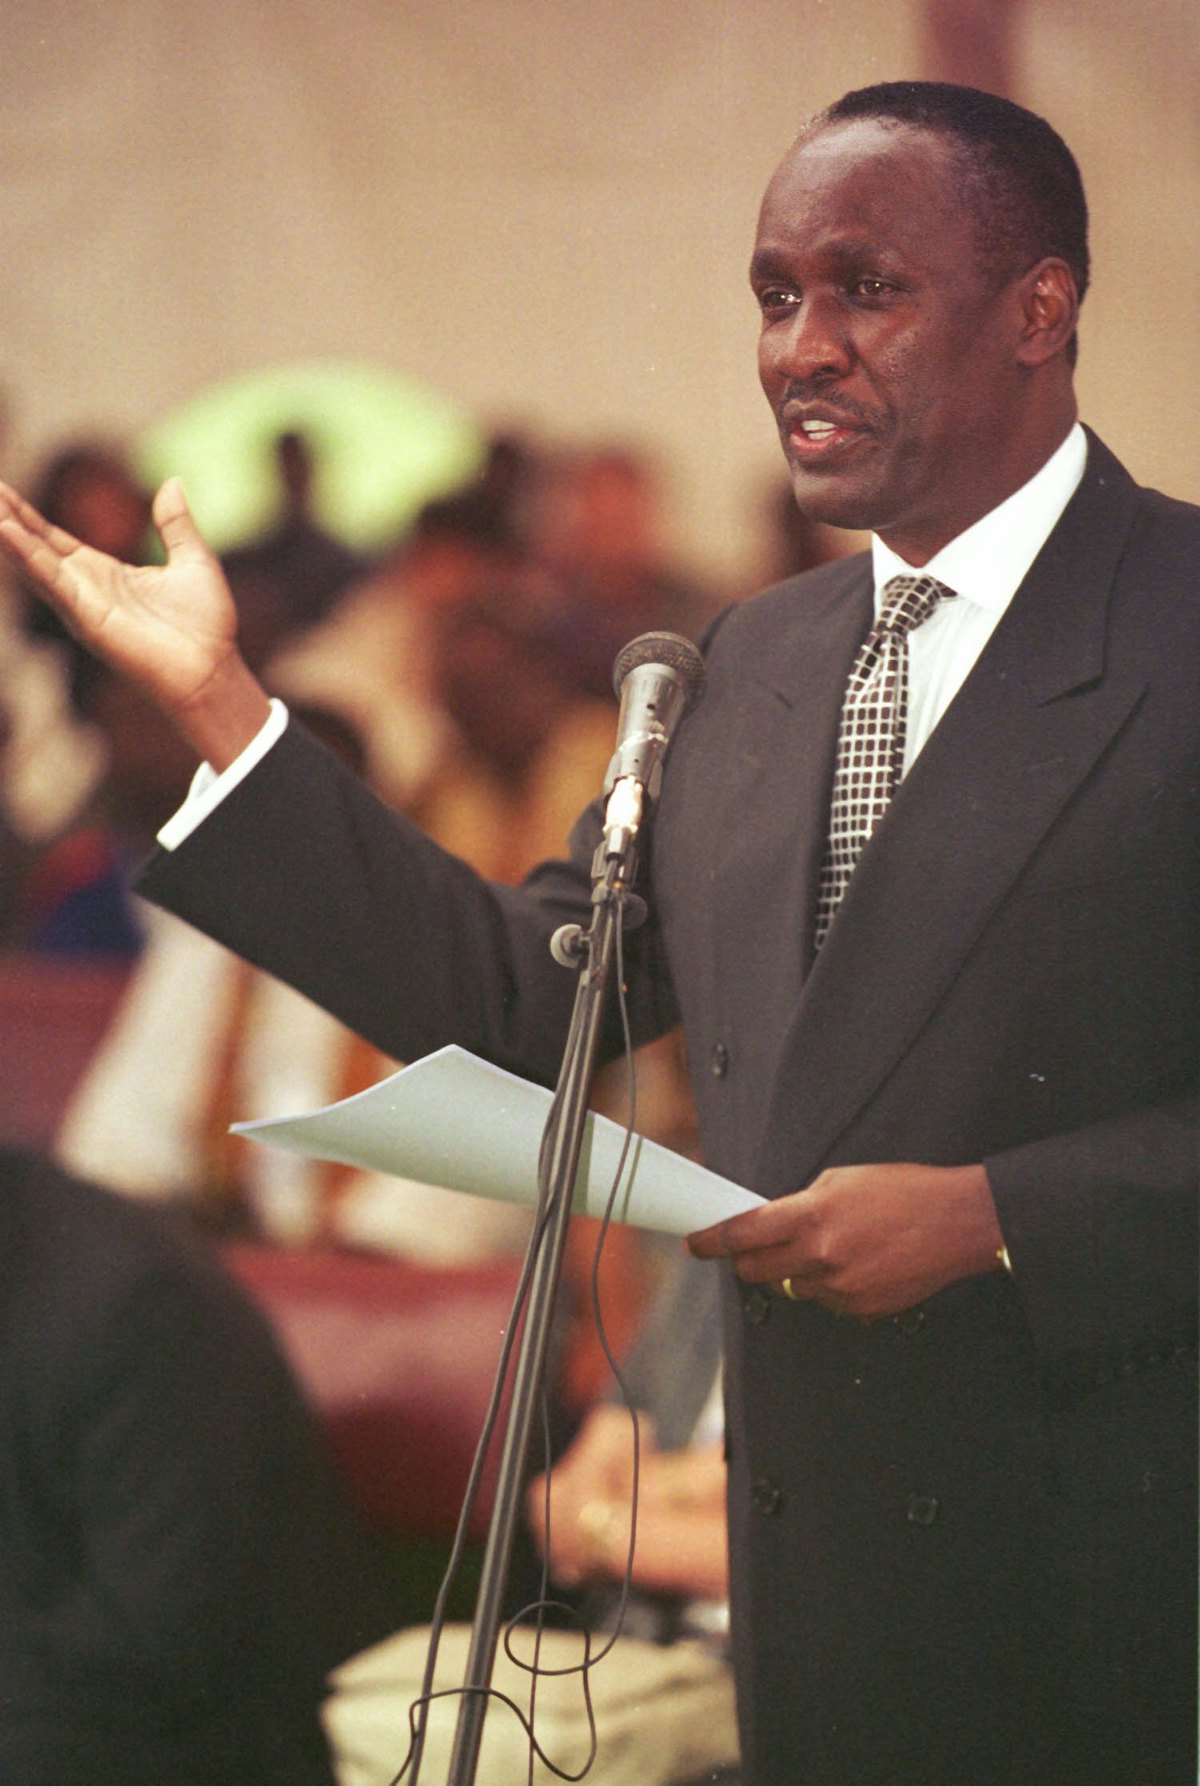 Captain Michael Mukula, Uganda's State Minister for Health, reads a statement from the President Yoweri Kaguta Museveni at a commemoration of the 50th anniversary of the Baha’i community of Uganda, held at the Baha’i House of Worship near Kampala on 2 August 2001. (Photo: Ryan Lash)